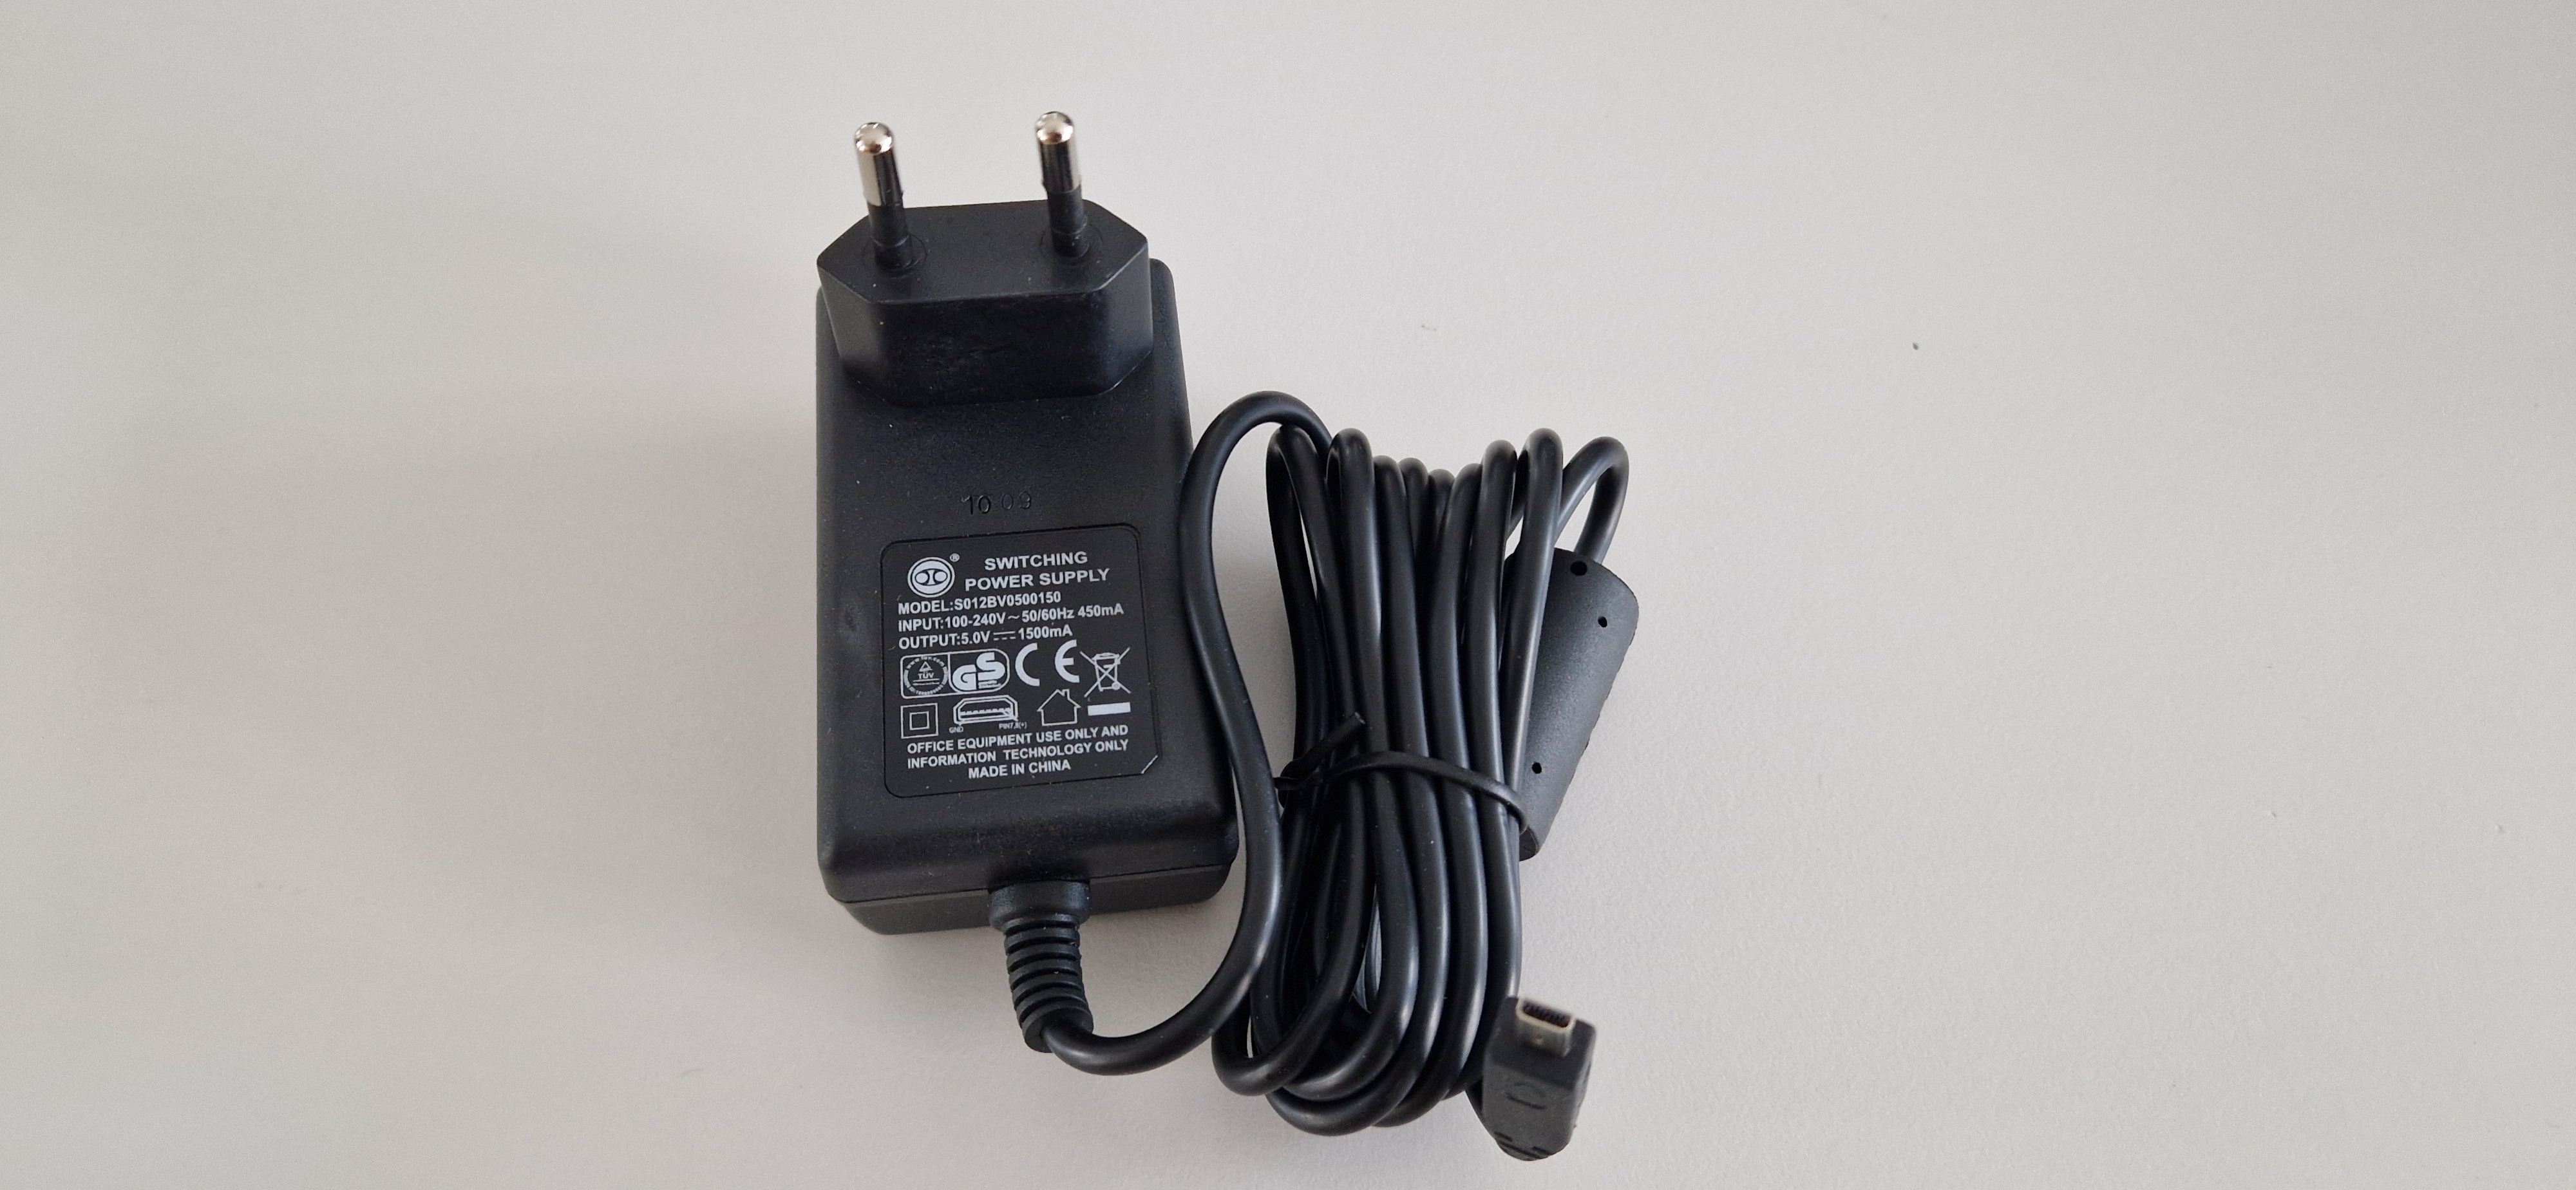 High Quality Brand New Branded 5V Power Supplies assorted